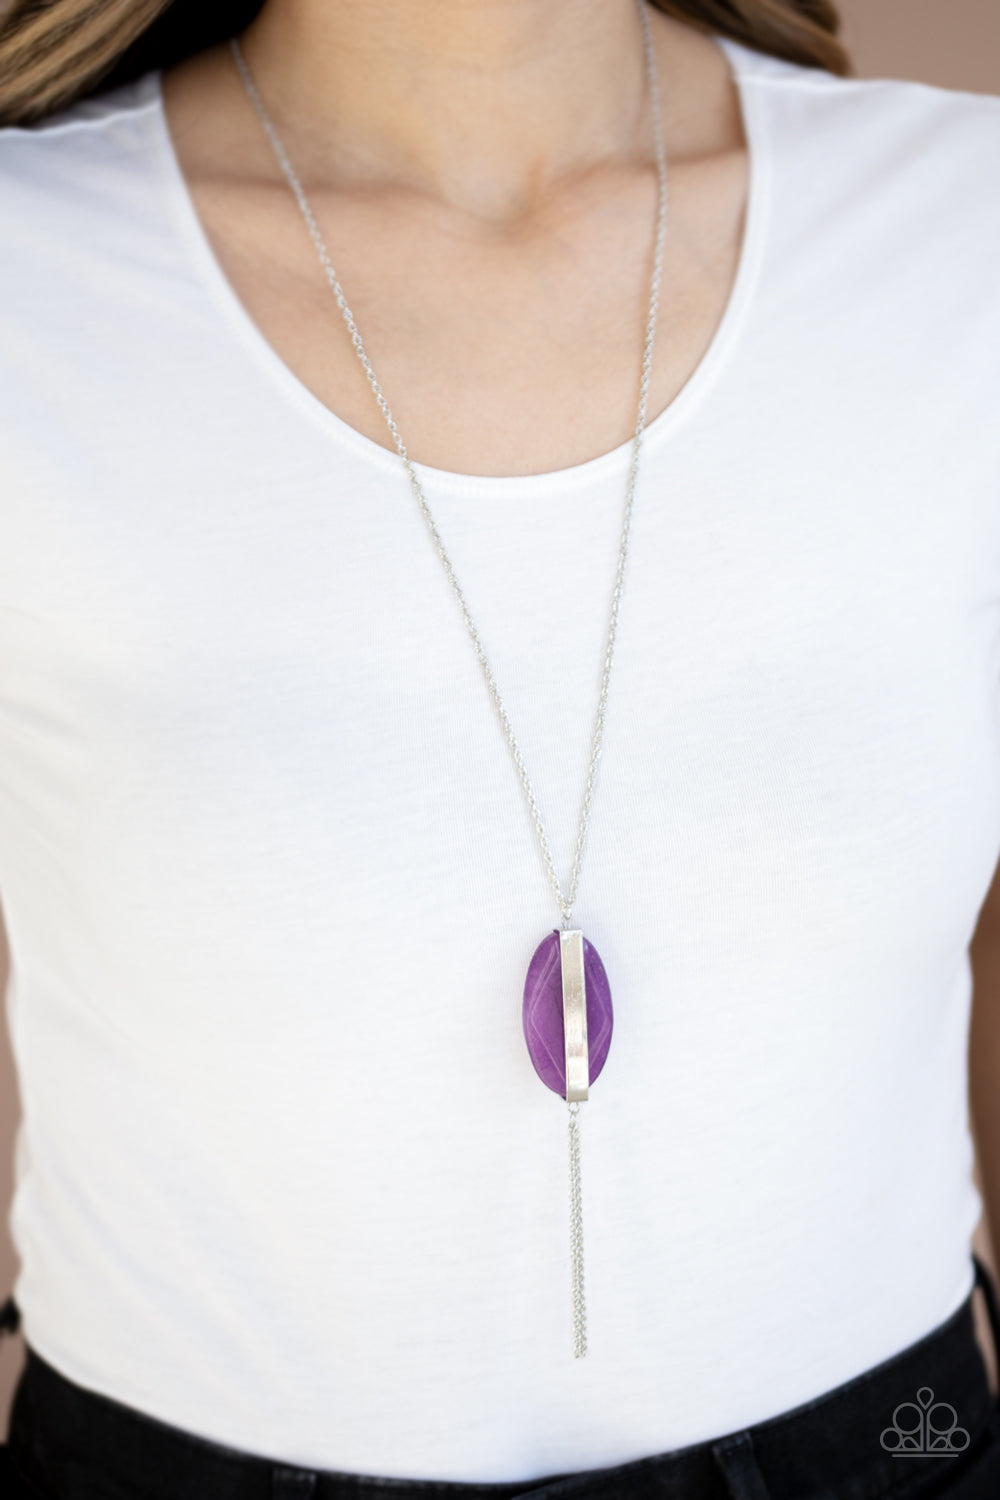 Tranquility Trend - Purple necklace